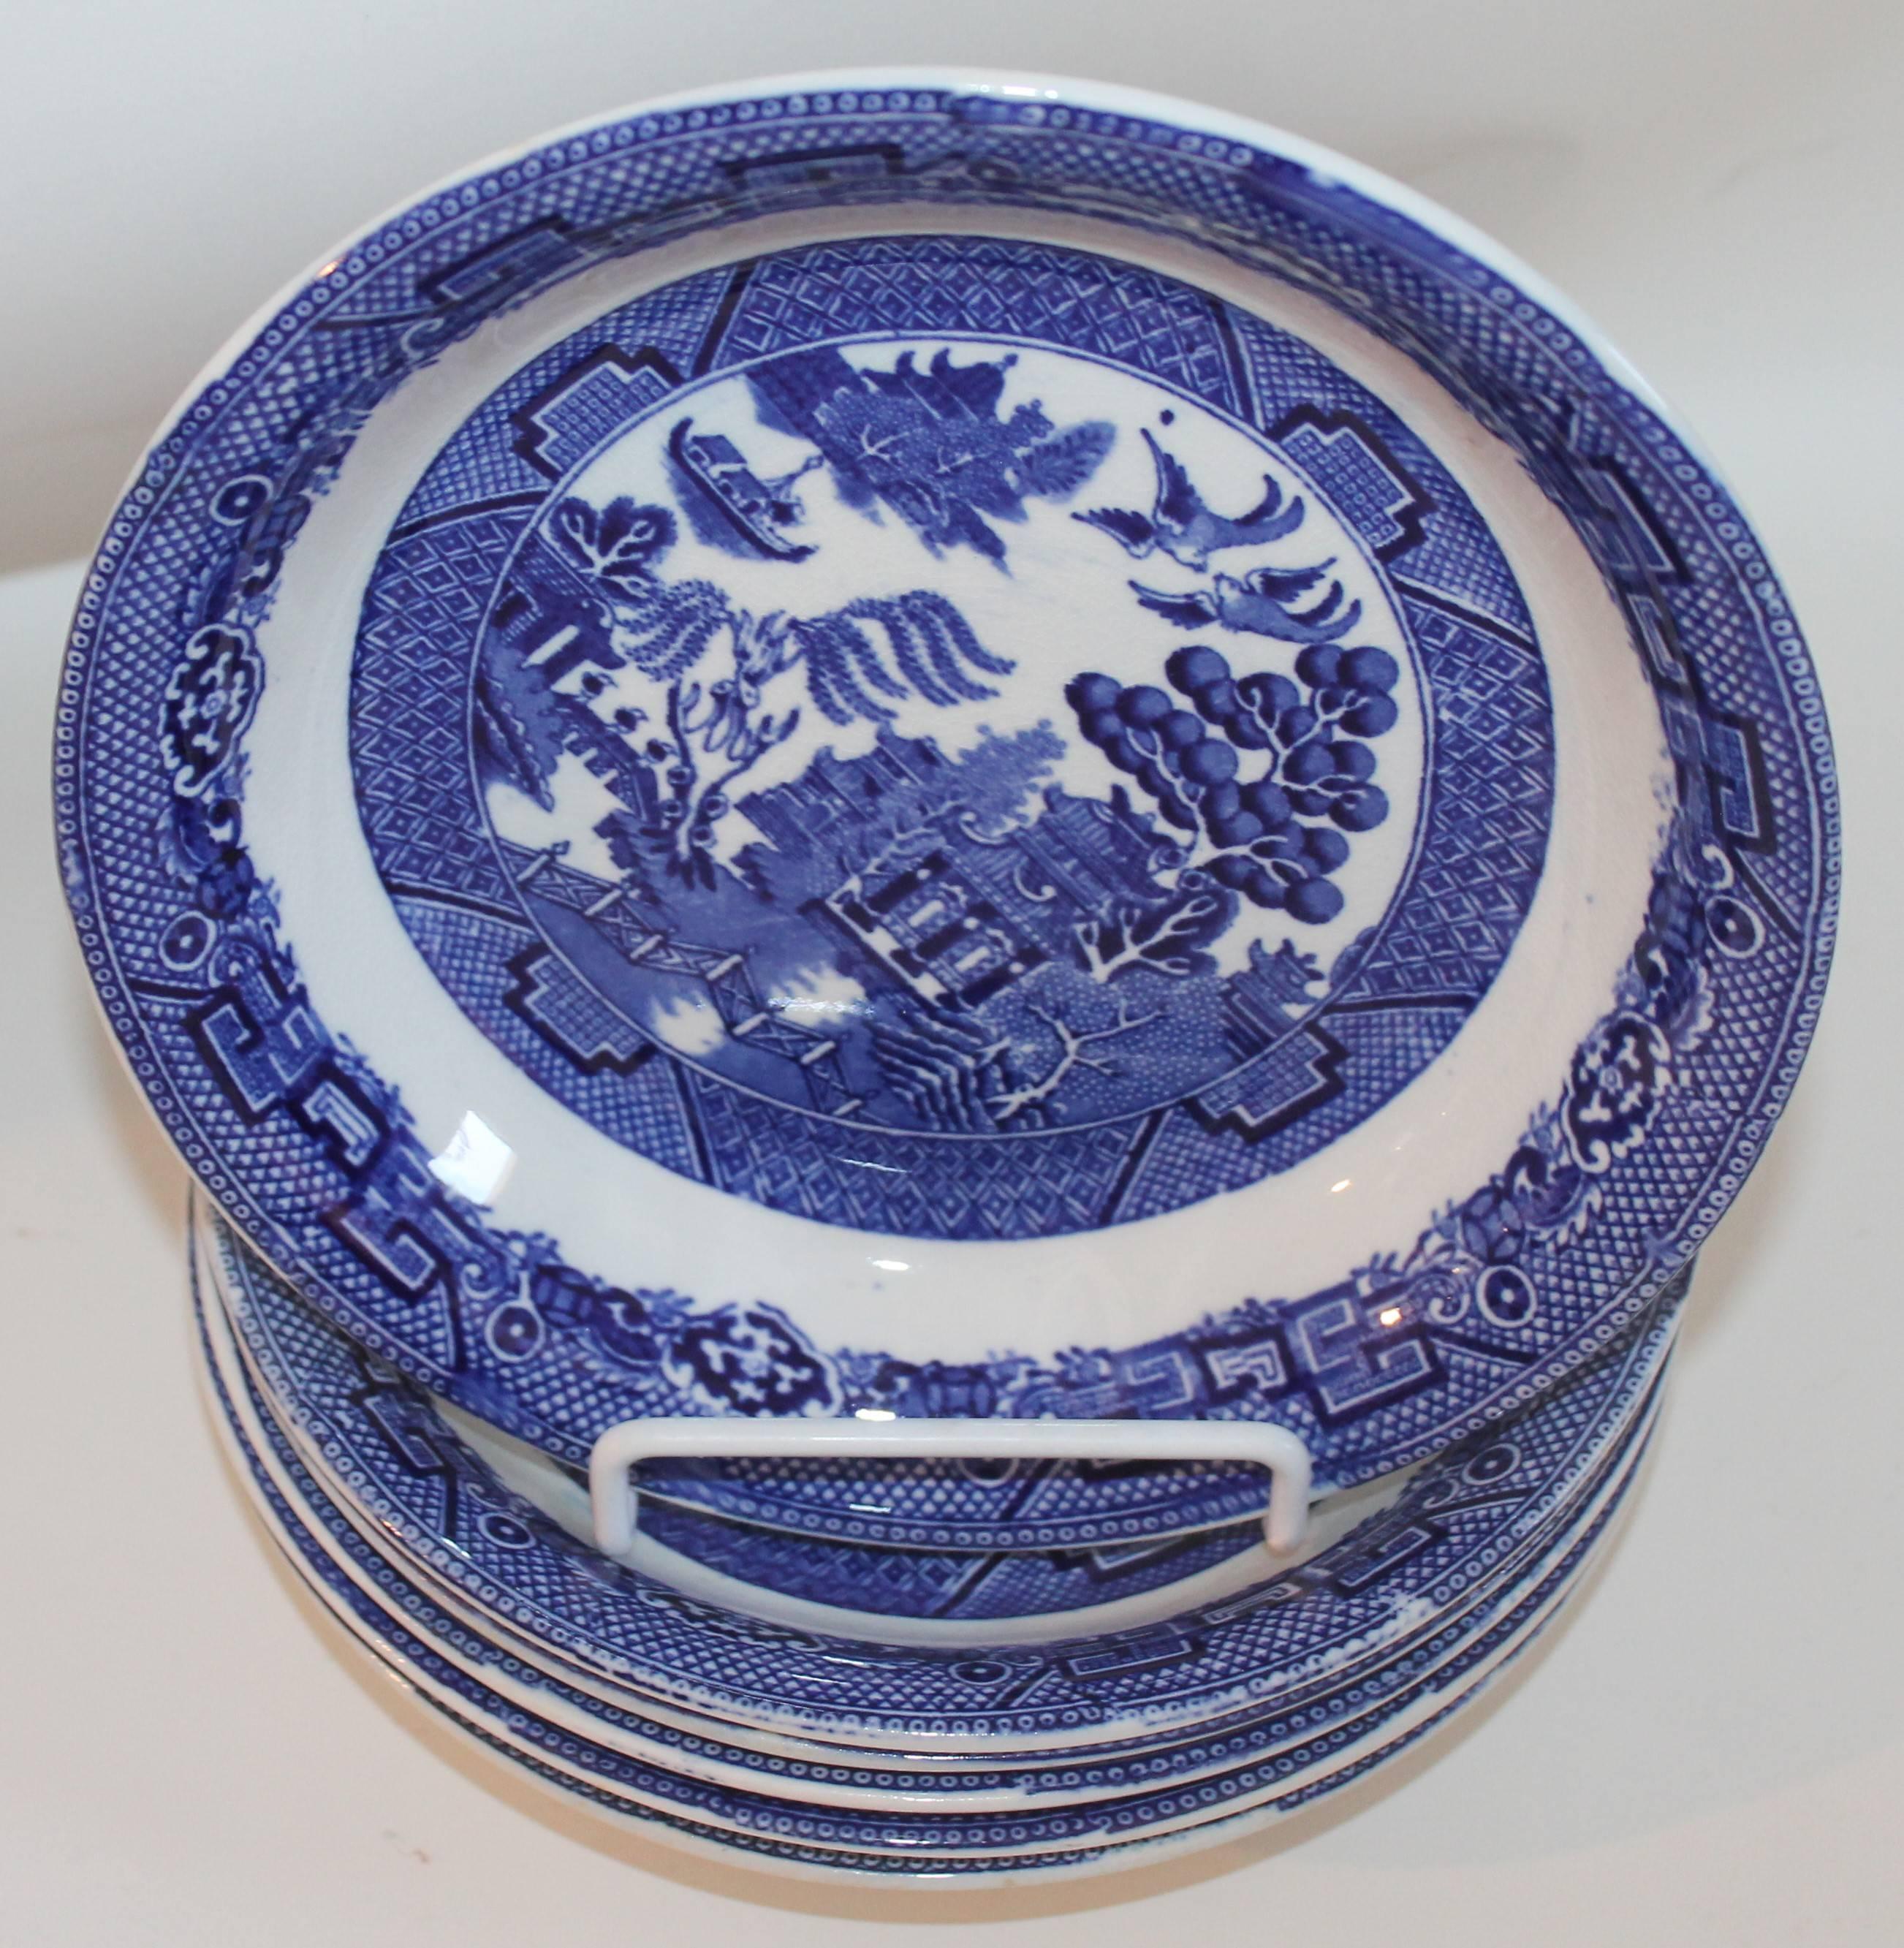 Allertons Ltd. English blue willow 19th century blue willow plates in amazing condition. These plates have been stamped by the maker (shown in the photos). This set of six plates is a great collection of glazed blue willow plates are 8.5 inches in